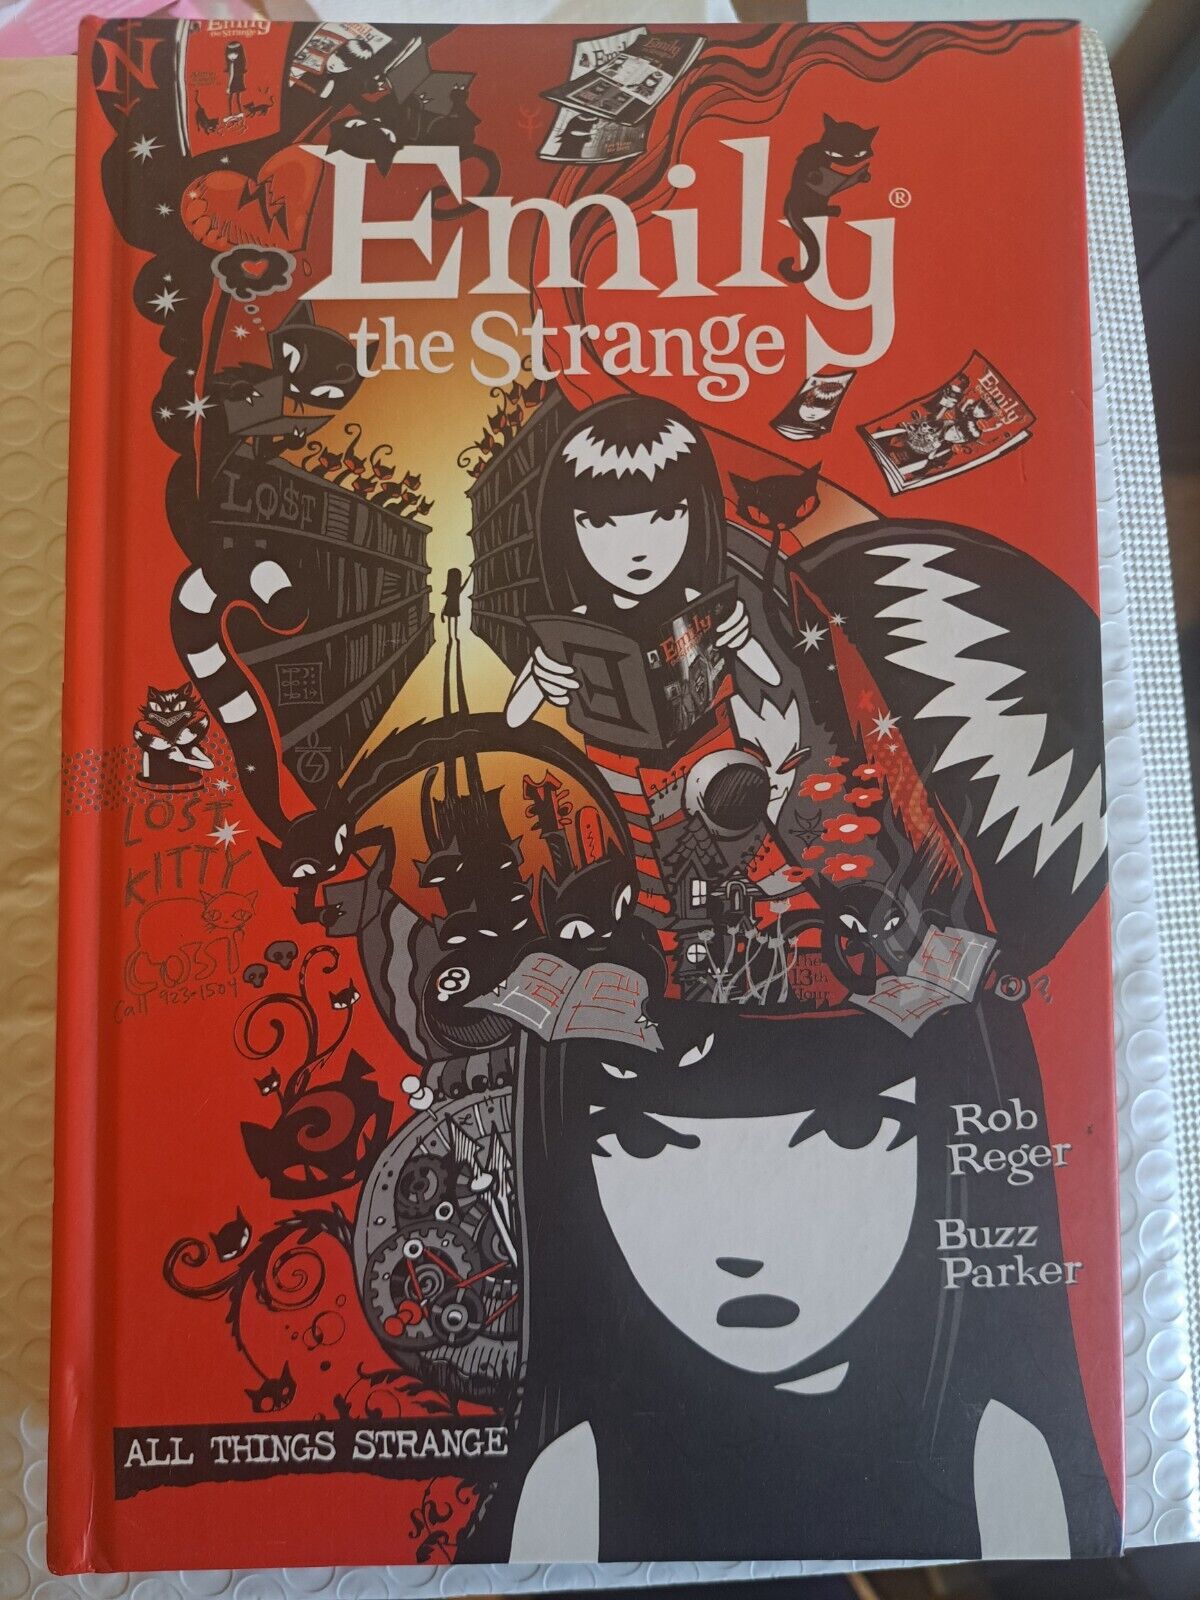 The Complete Emily the Strange by Rob Reger & Buzz Parker. HC